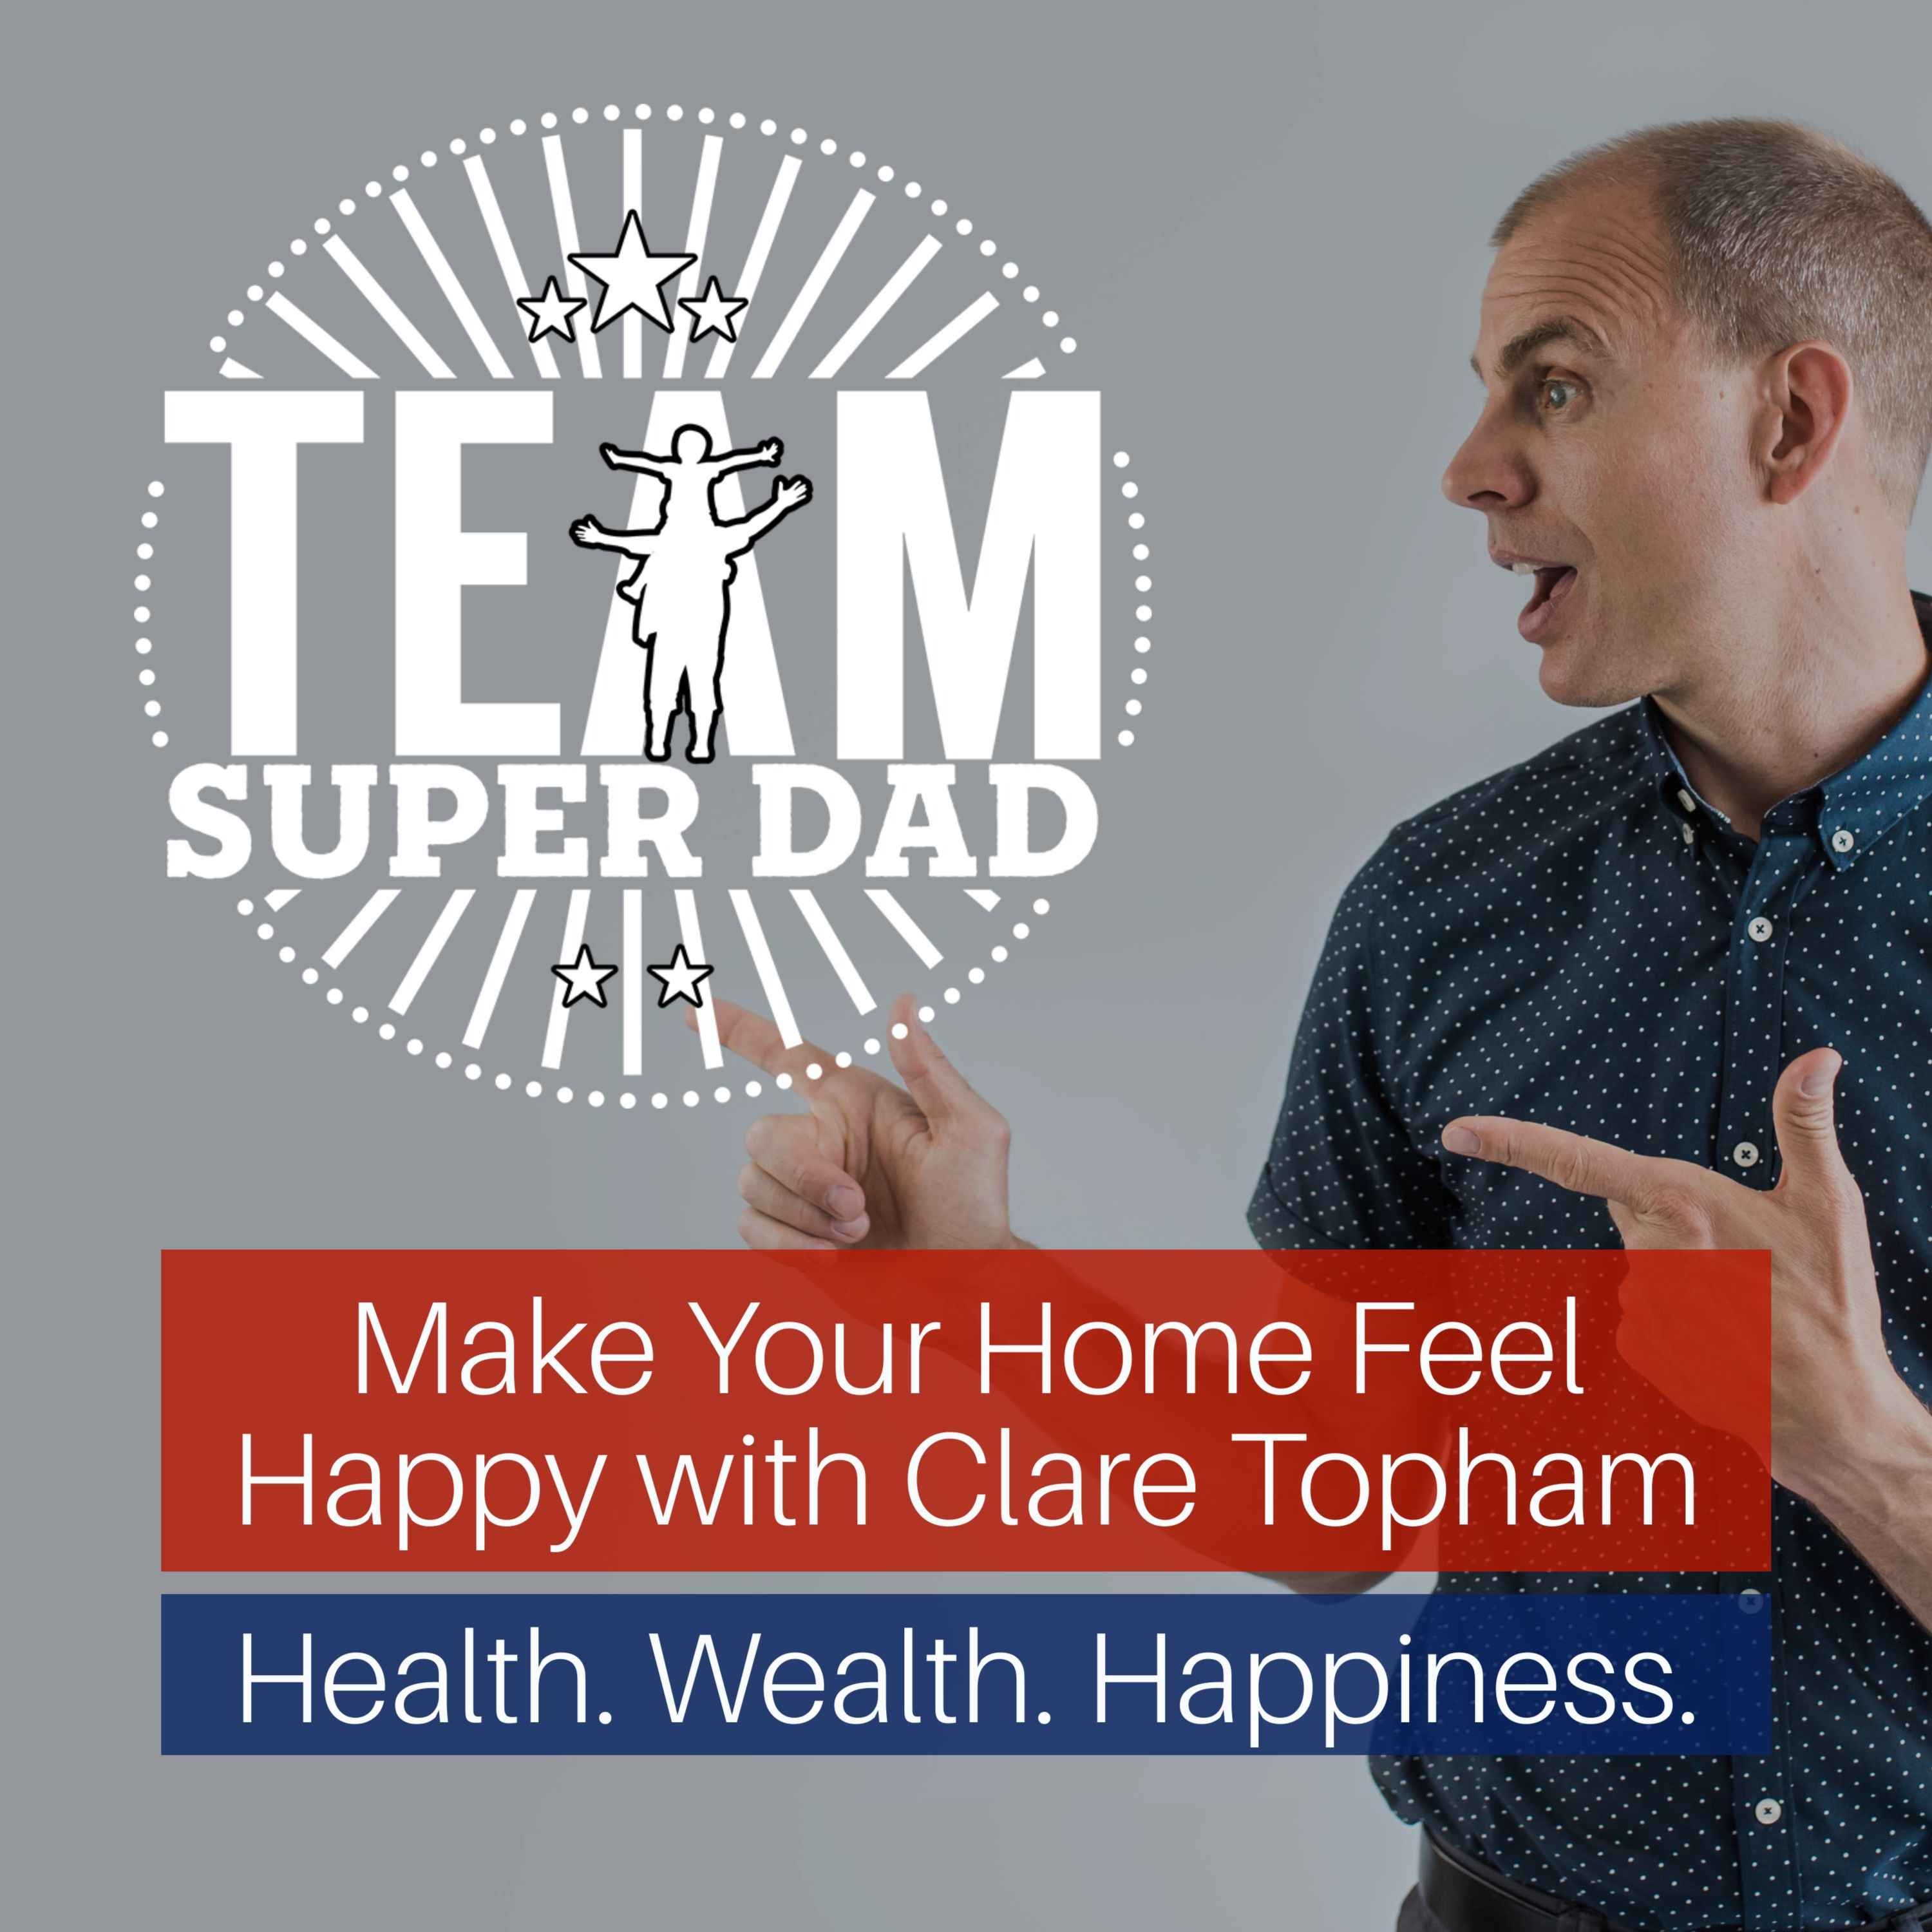 Helping Dads Make Their Home Feel Happy with Clare Topham